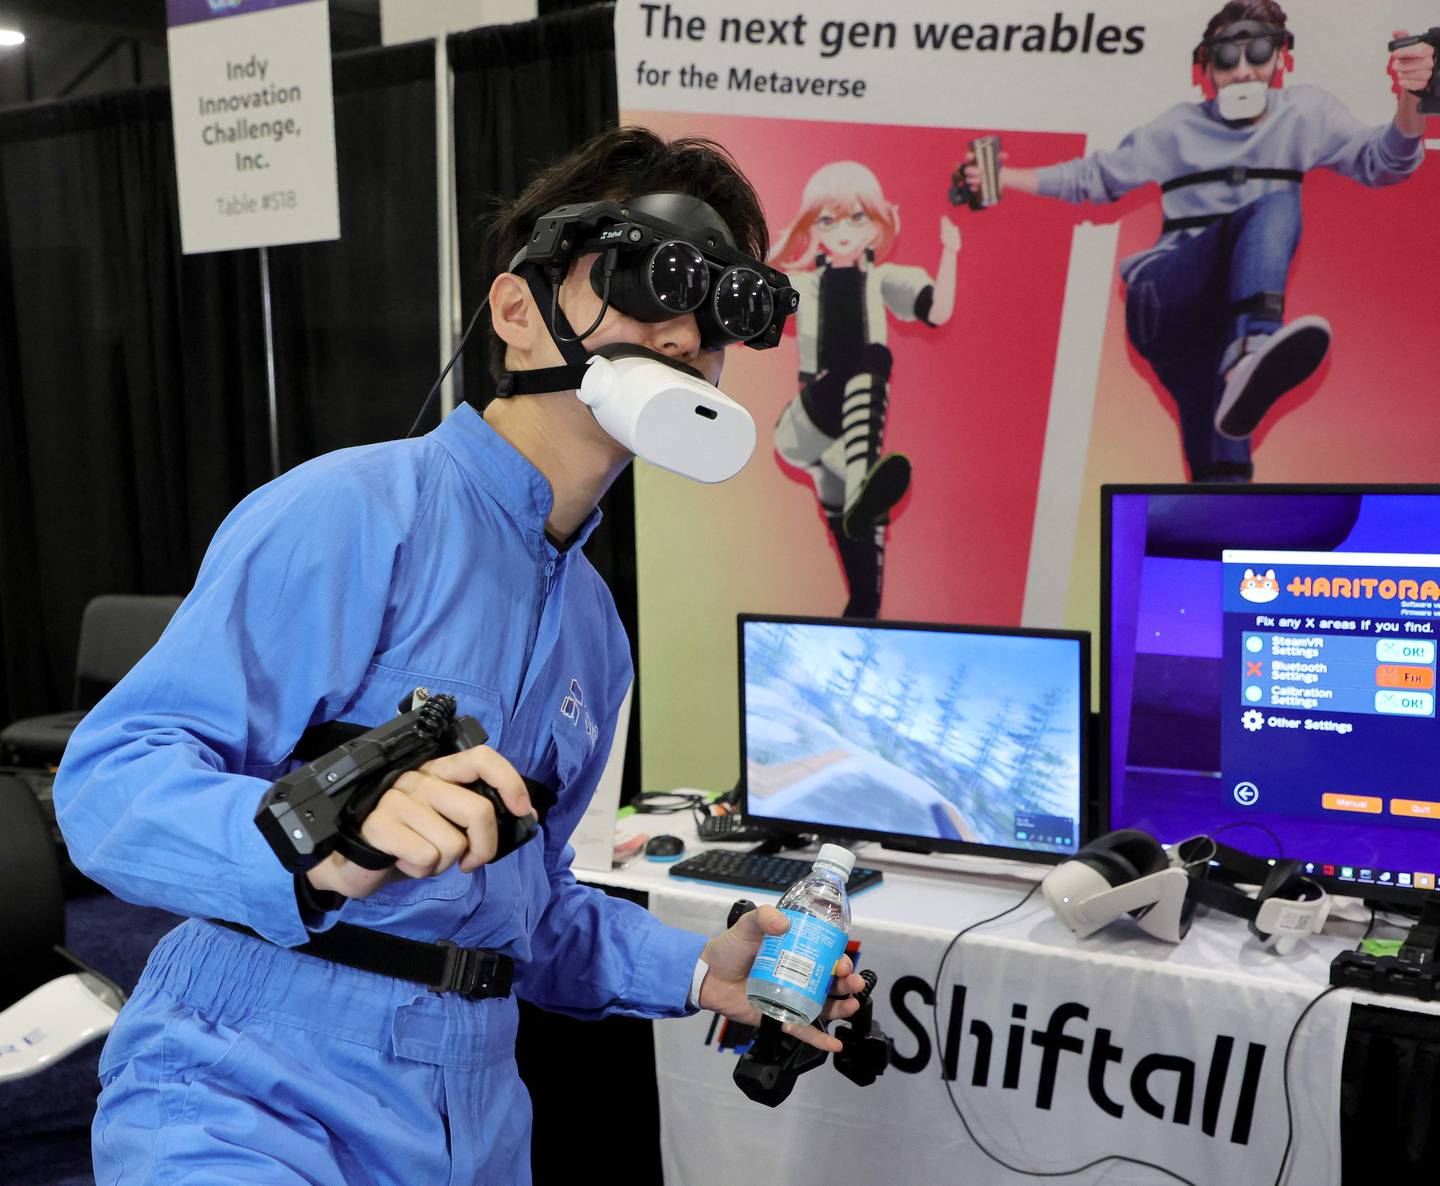 A user demonstrates Shiftall's full-body tracking device, including the mutalk bluetooth microphone over his mouth and FlipVR controllers, for playing VR in the metaverse during a press event at CES 2023. Getty